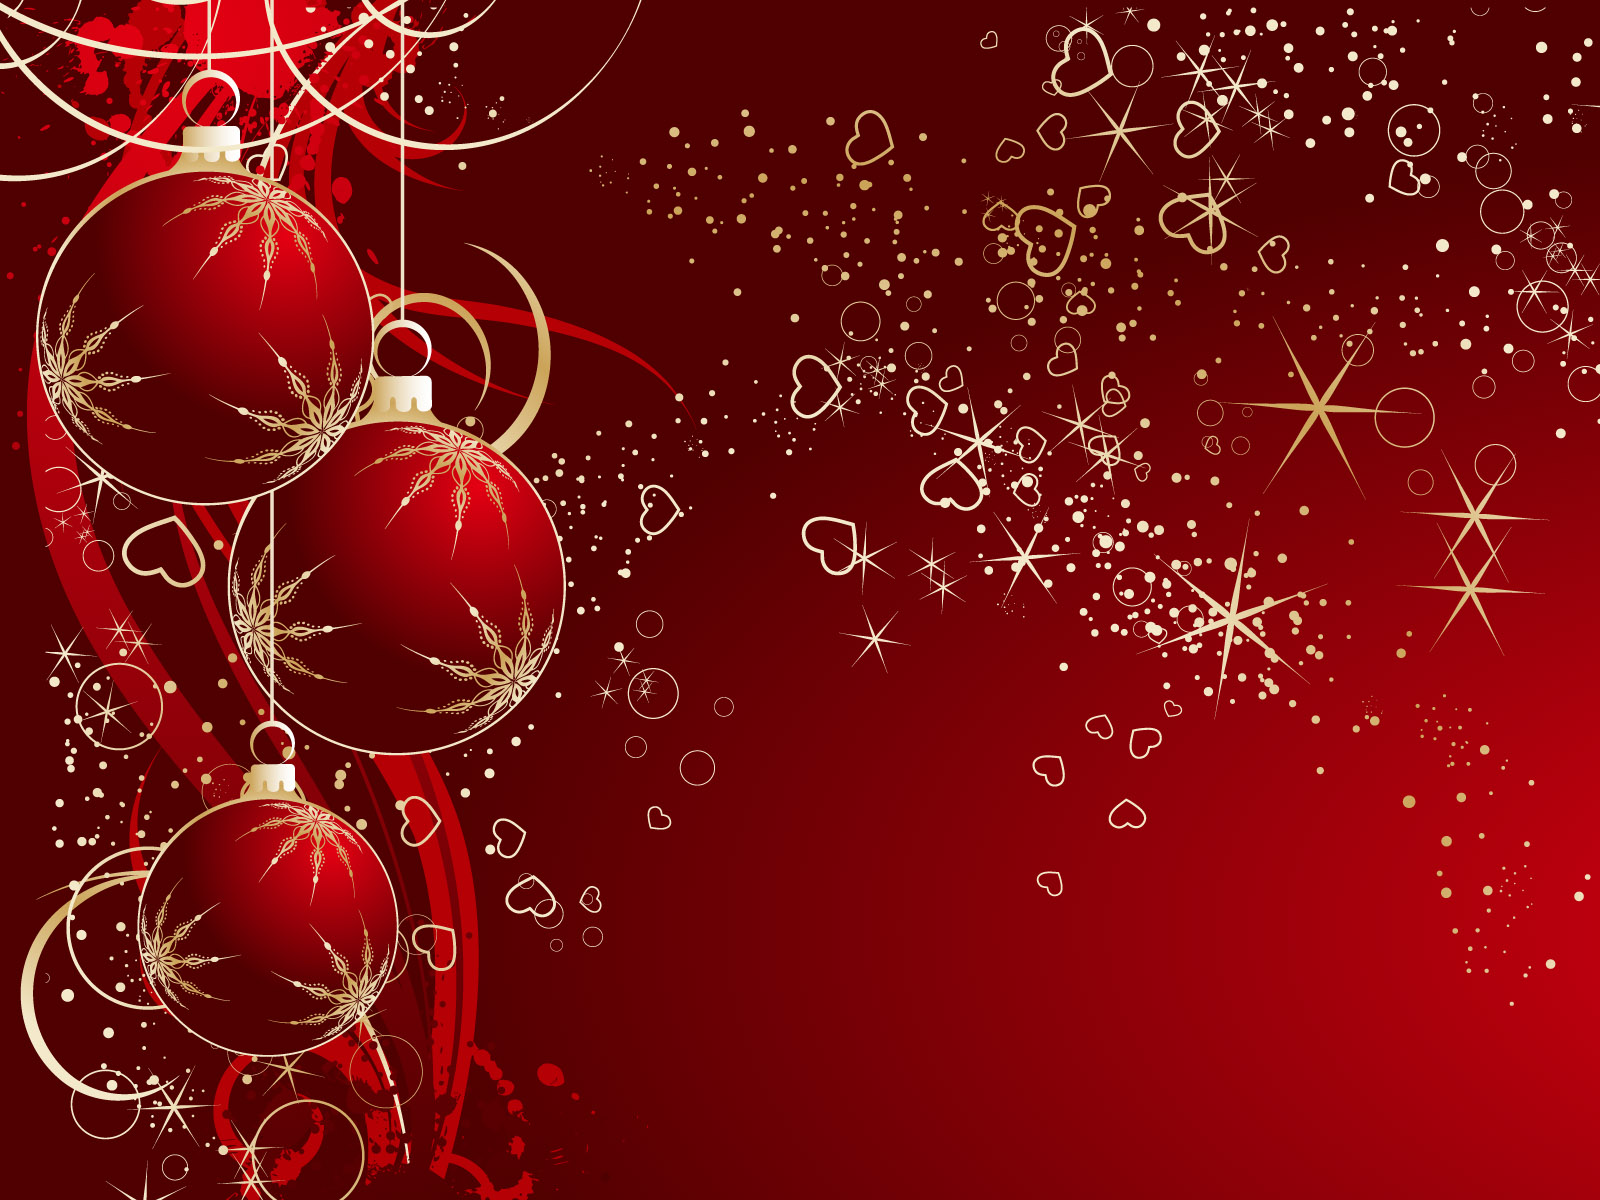 Christmas Background HD Wallpaper Image Photos